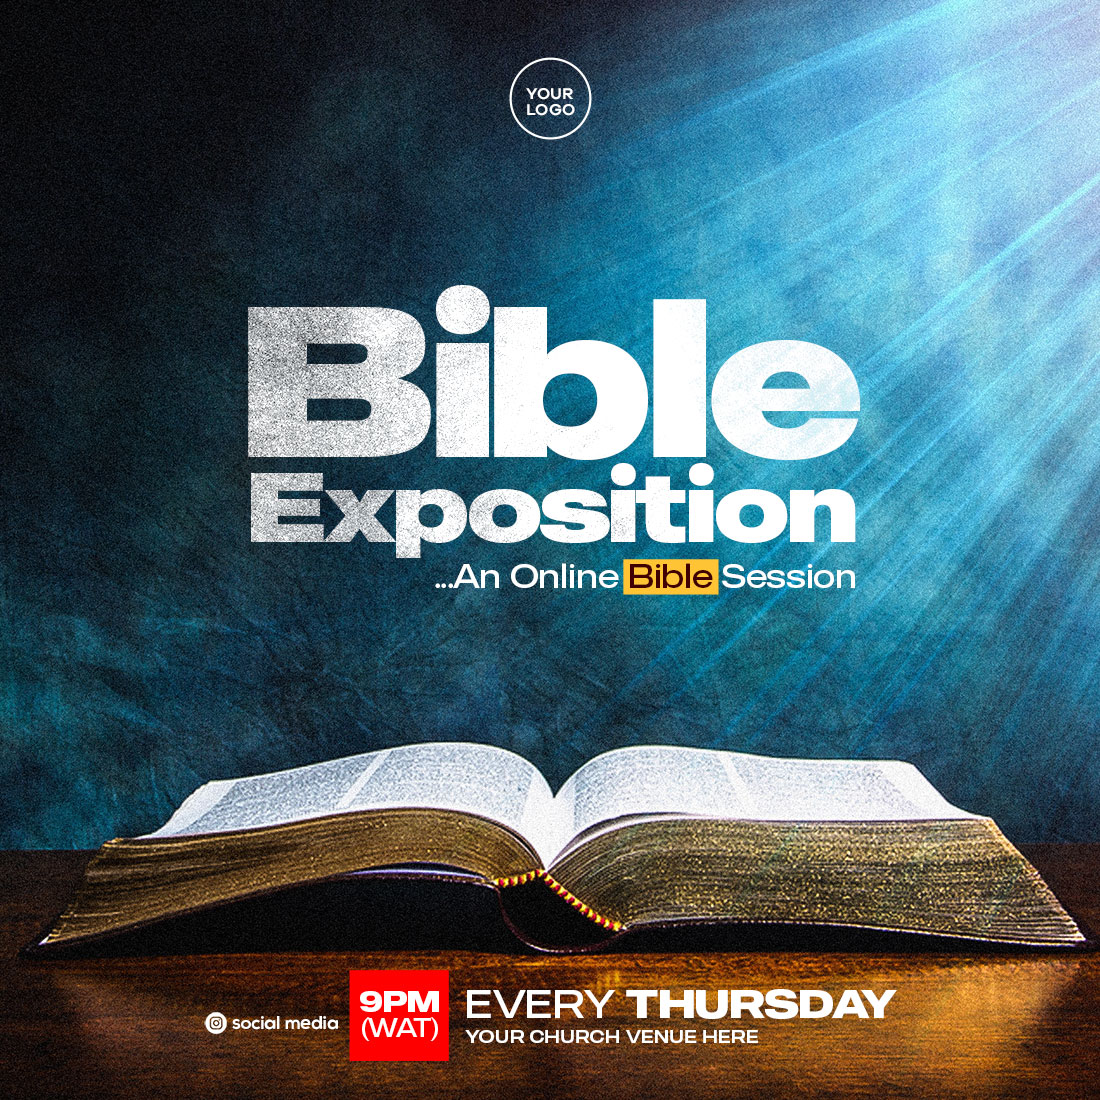 CHURCH BIBLE EXPOSITION FLYER cover image.